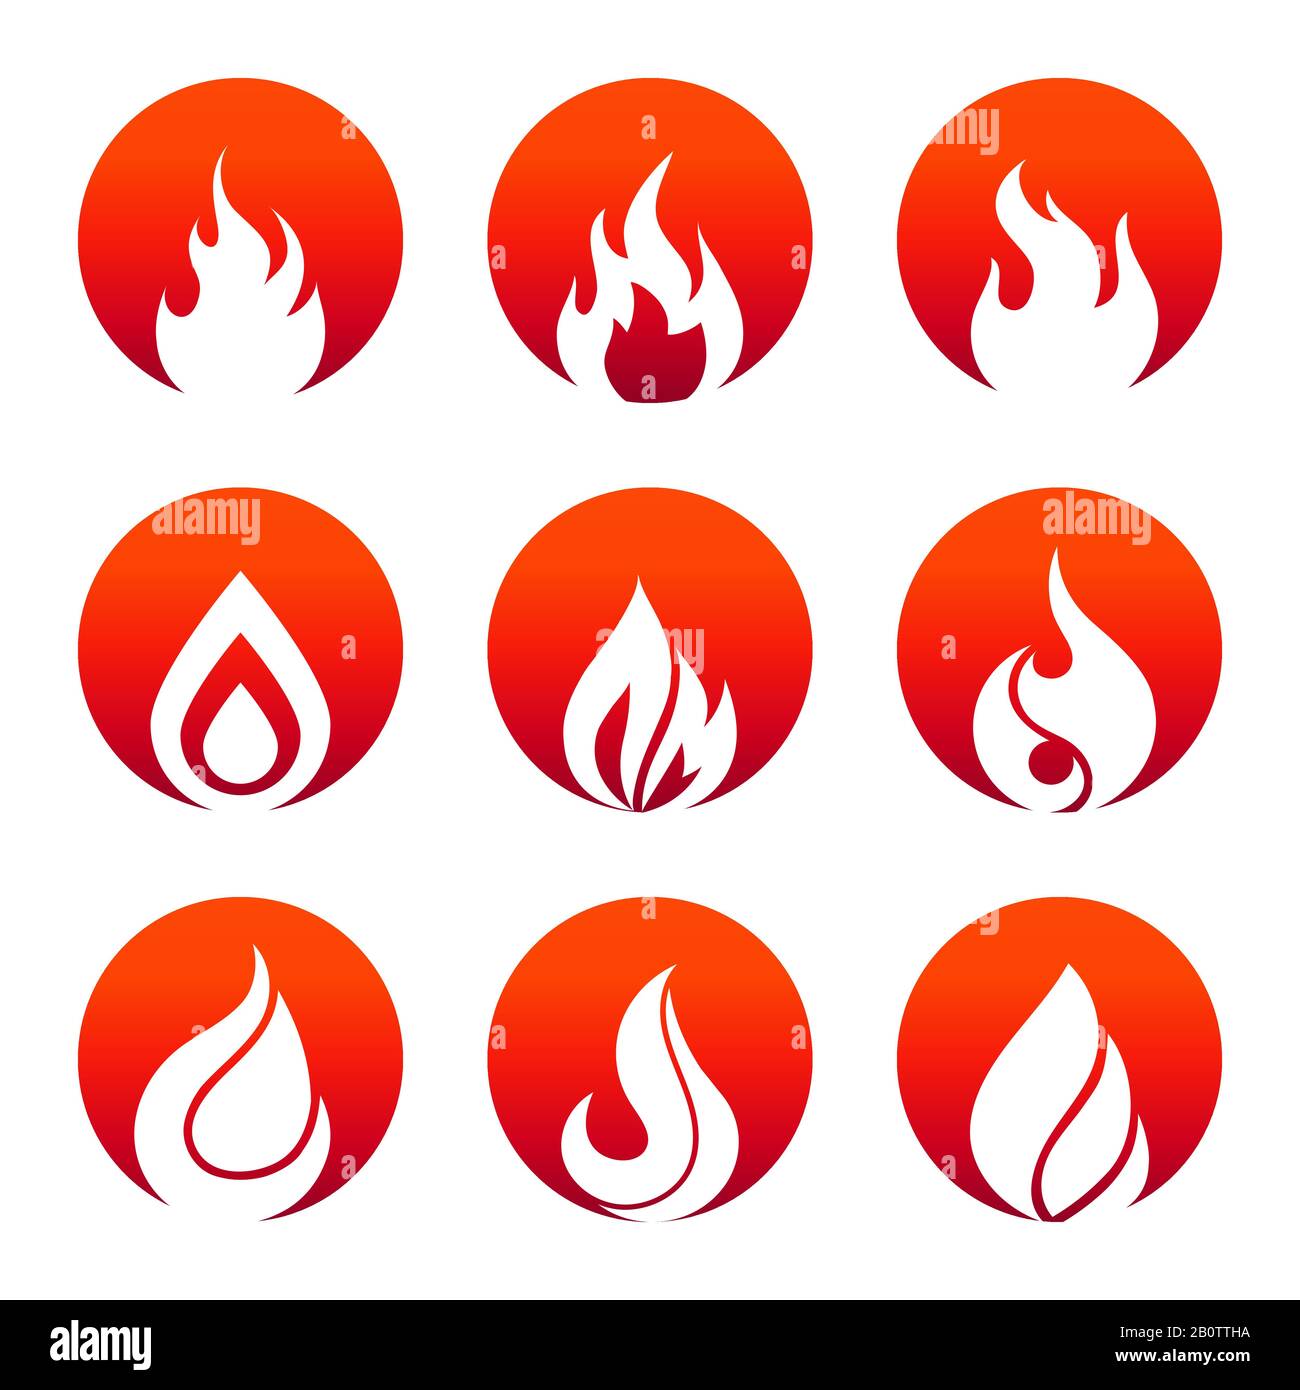 White flat fire icons in red rounds design. Collection of flame sings. Vector illustration Stock Vector